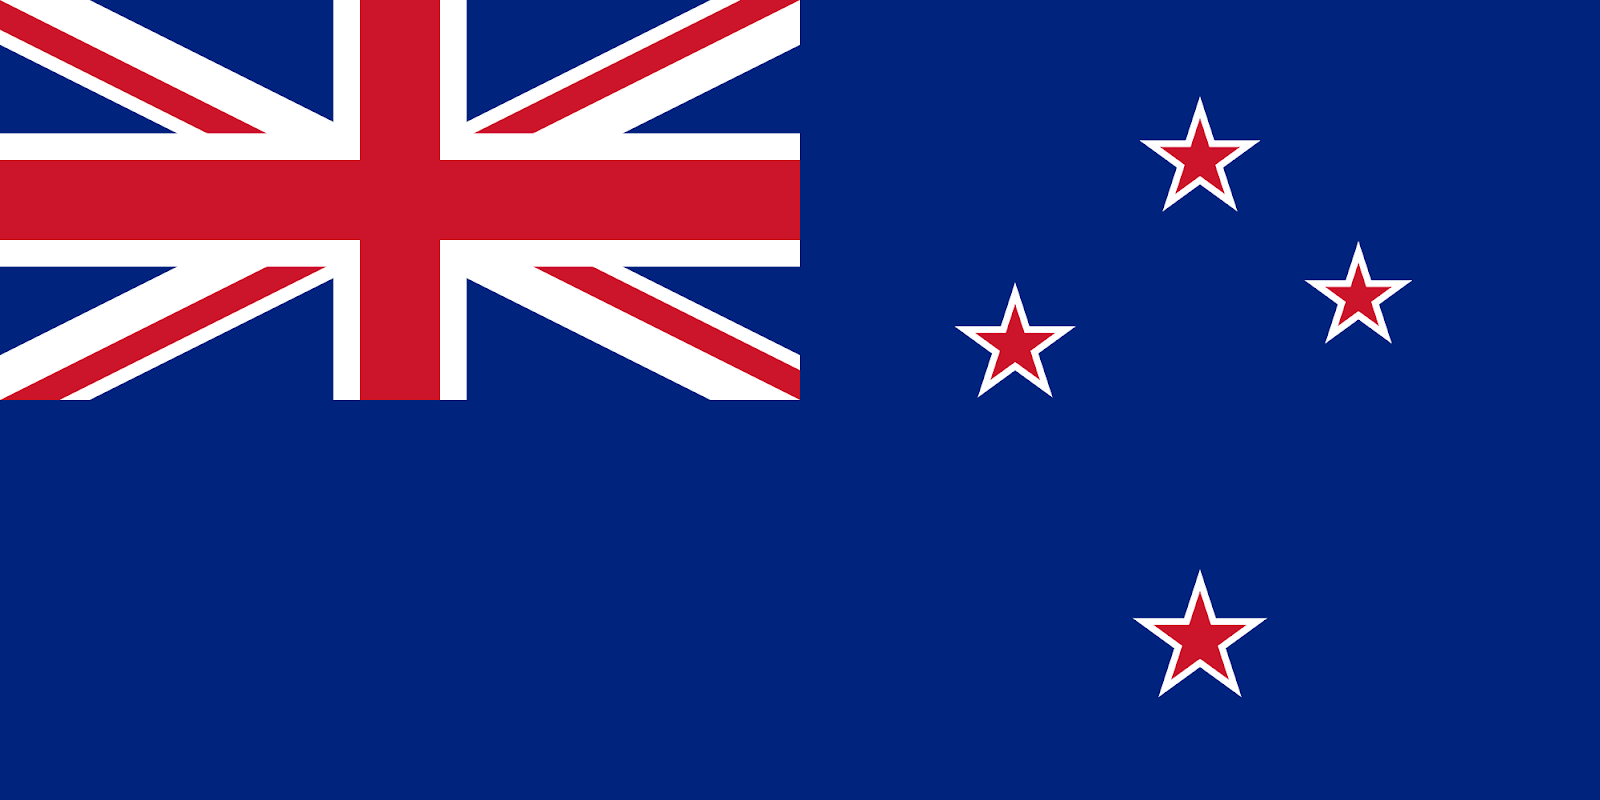 https://upload.wikimedia.org/wikipedia/commons/thumb/3/3e/Flag_of_New_Zealand.svg/2000px-Flag_of_New_Zealand.svg.png